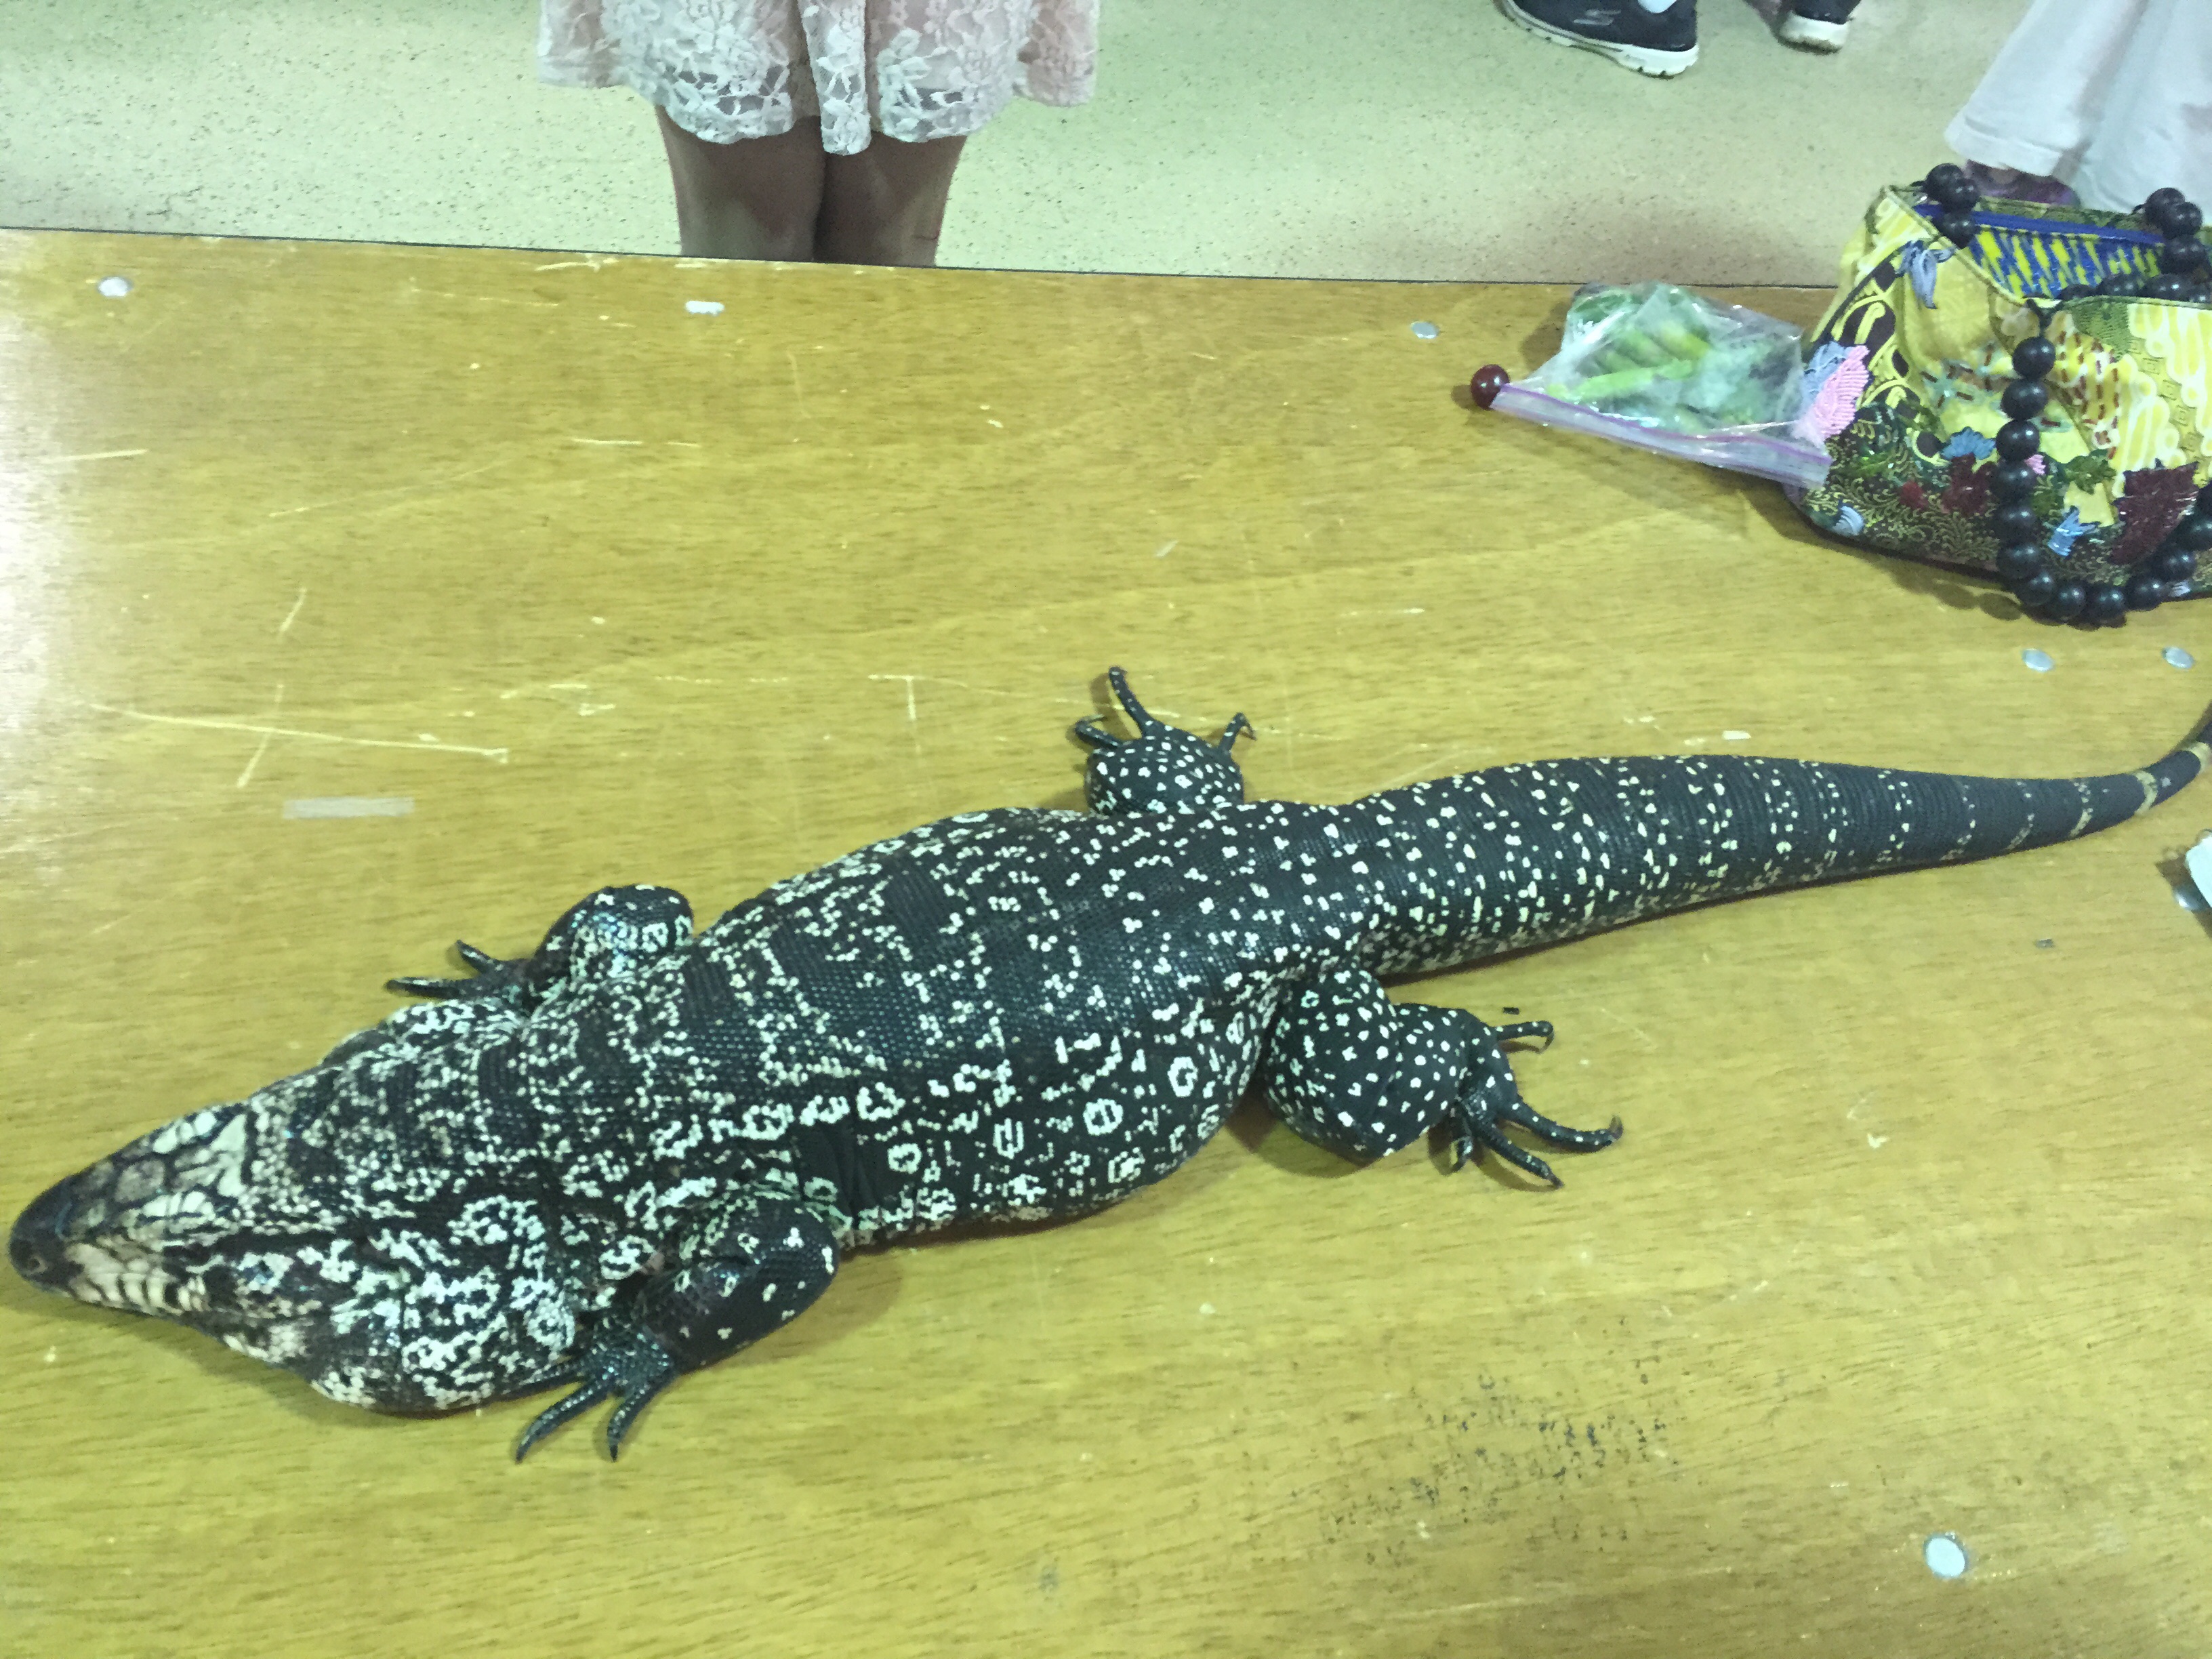 Sampled this sexy boy at the expo, thank you Teya for lending me your tegu for science!